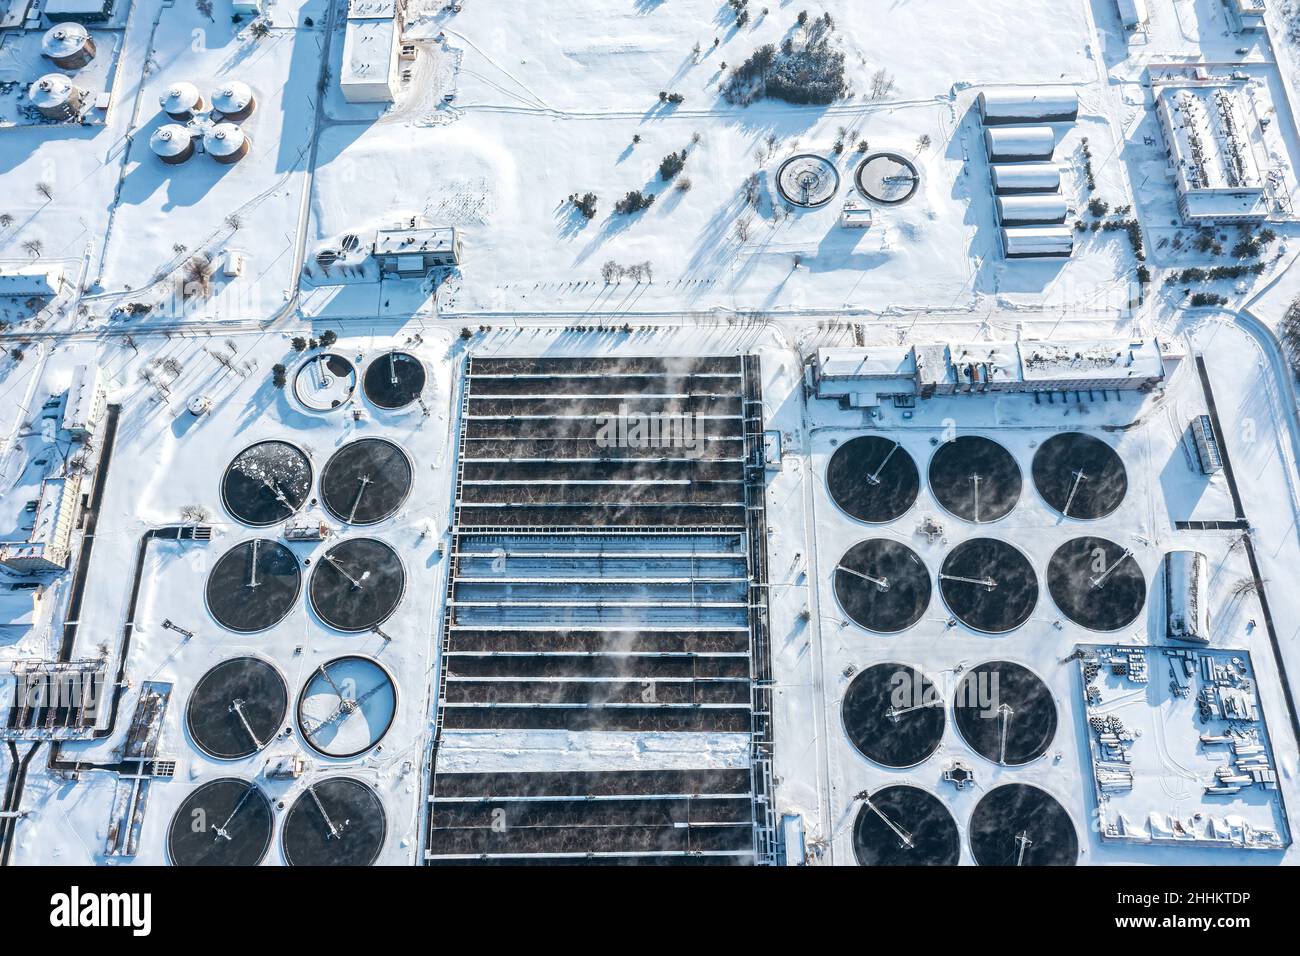 modern urban sewage water treatment plant. aerial view in winter cold sunny day. Stock Photo